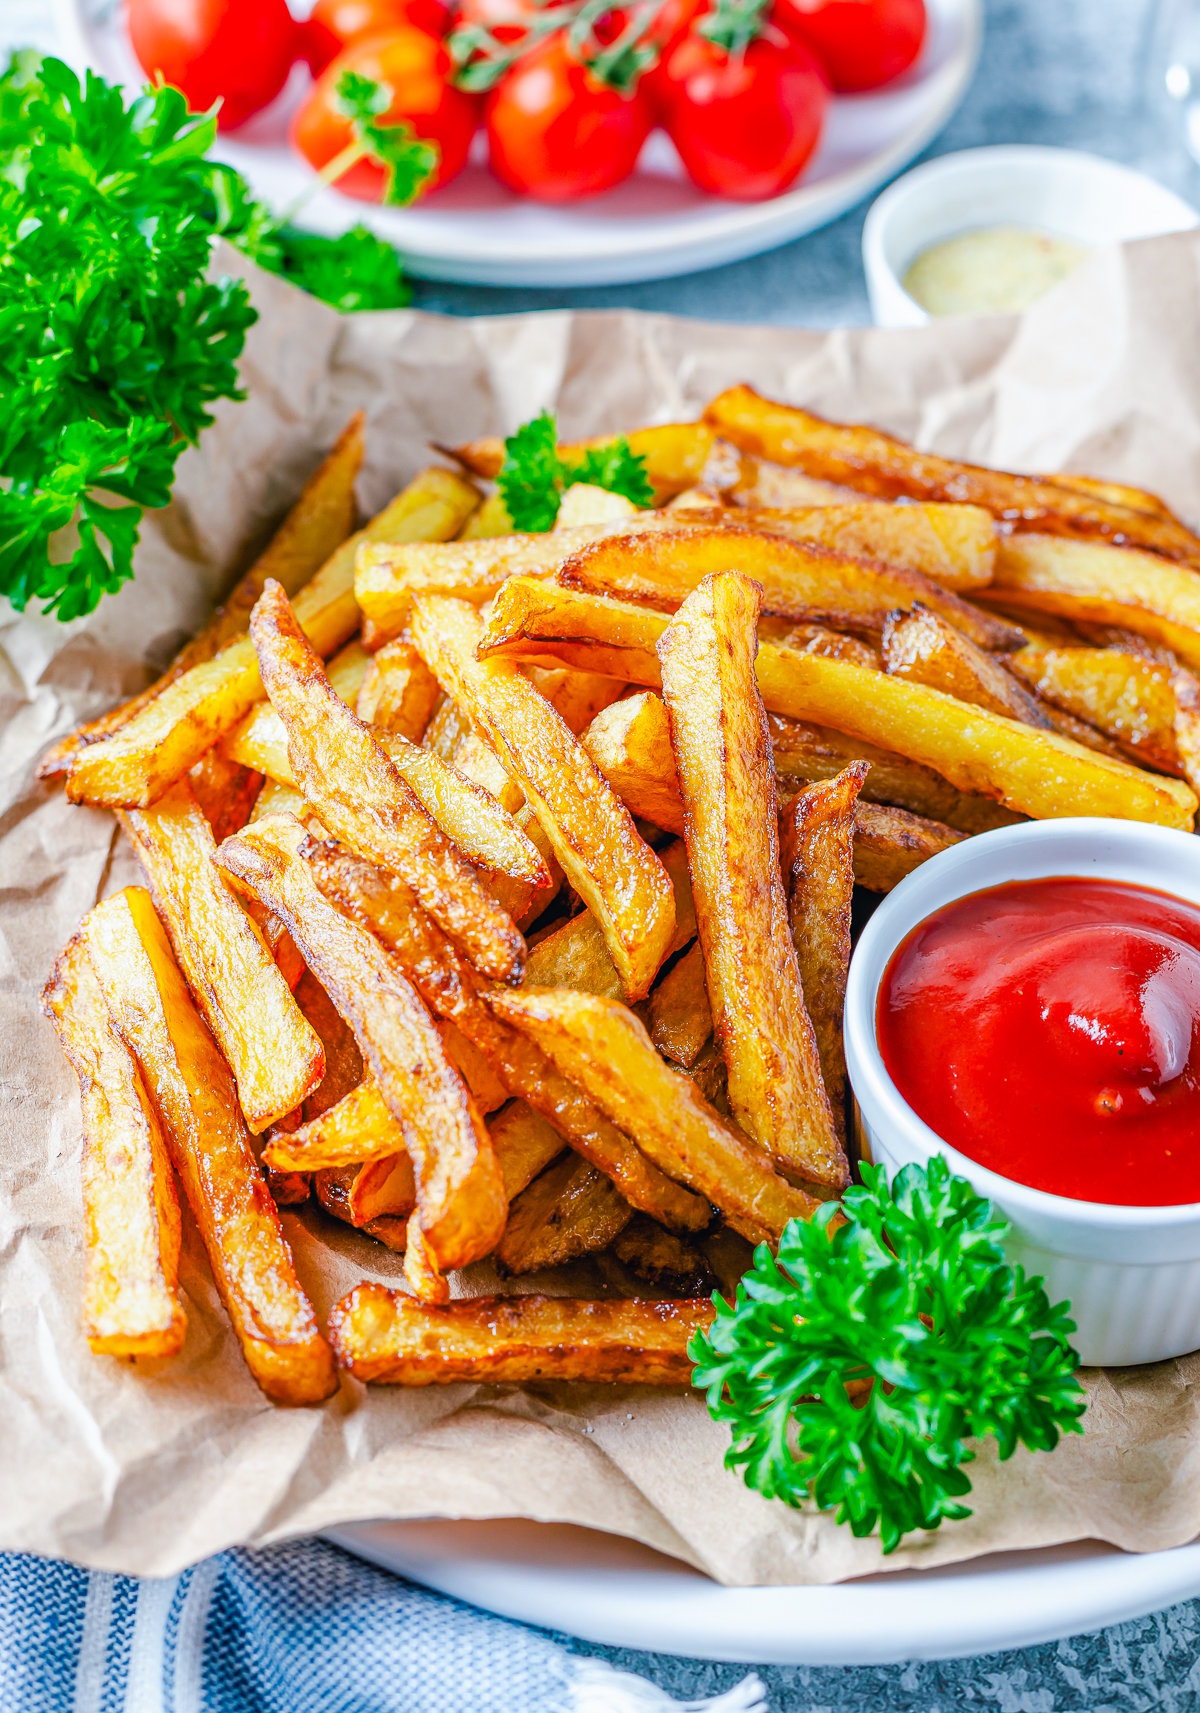 Side view of plated Homemade French Fries with ketchup and parsley.